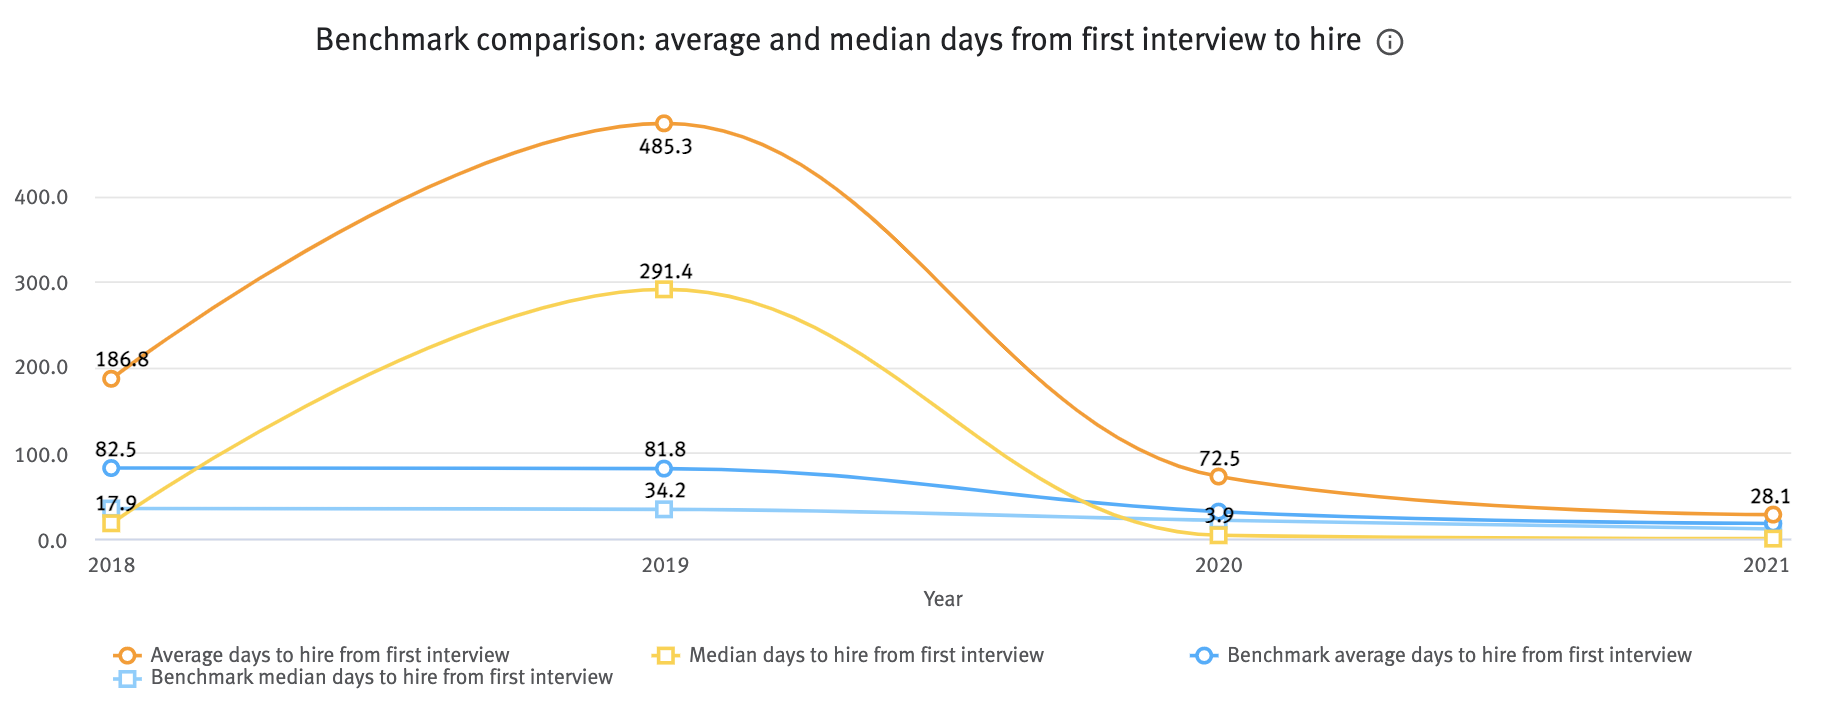 Benchmark comparison average and median days from first interview to hire chart